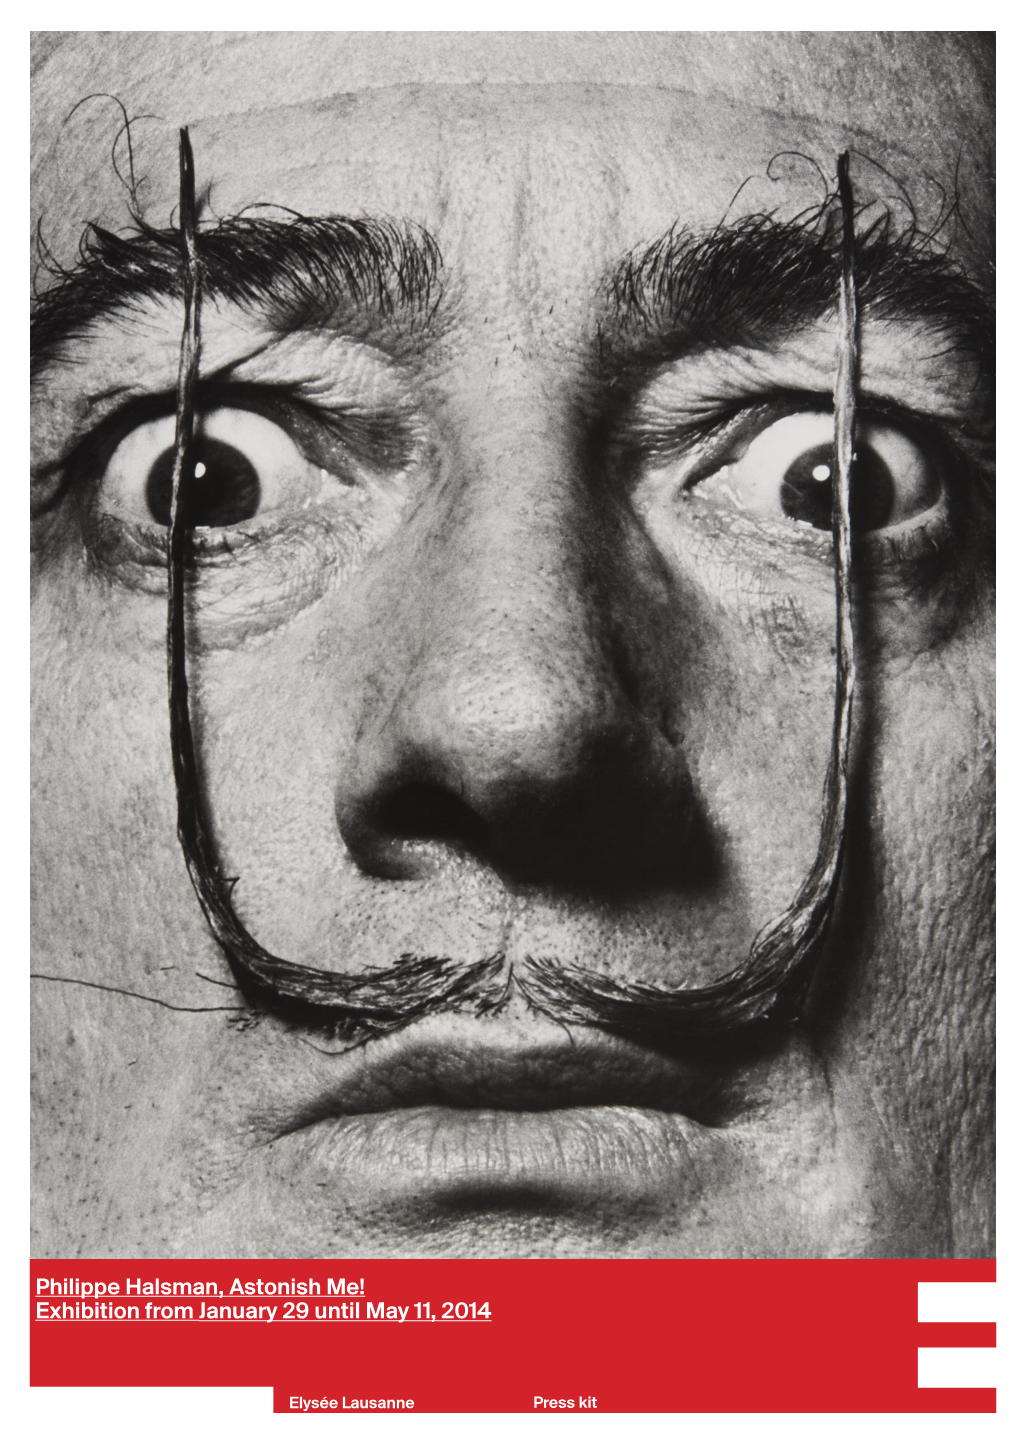 Philippe Halsman, Astonish Me! Exhibition from January 29 Until May 11, 2014